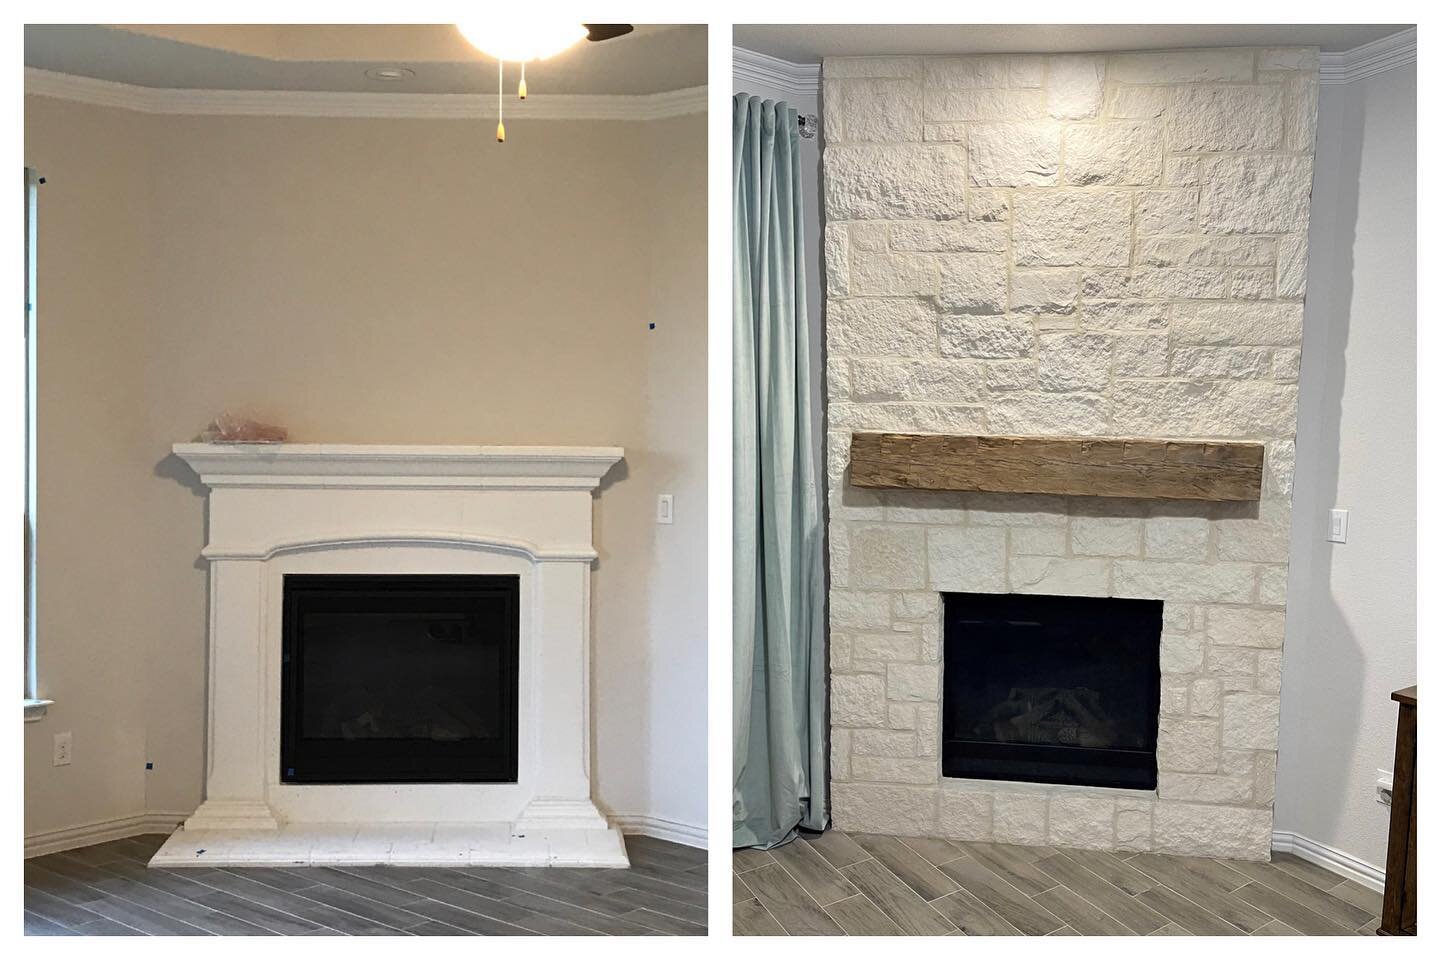 Fireplace Thursday! Make it a great day. Enjoy the before and after #timberframe #stonefireplace #austinstone #fireplace